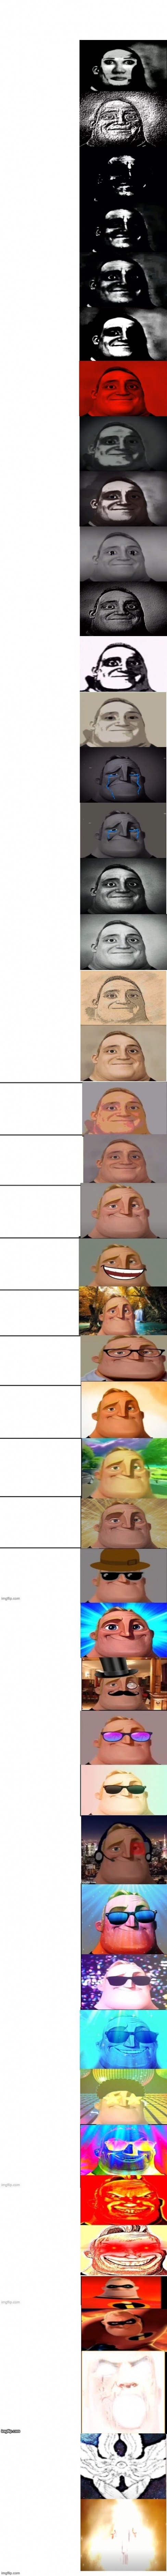 High Quality Mr Incredible Becoming Canny Mega Extended Blank Meme Template